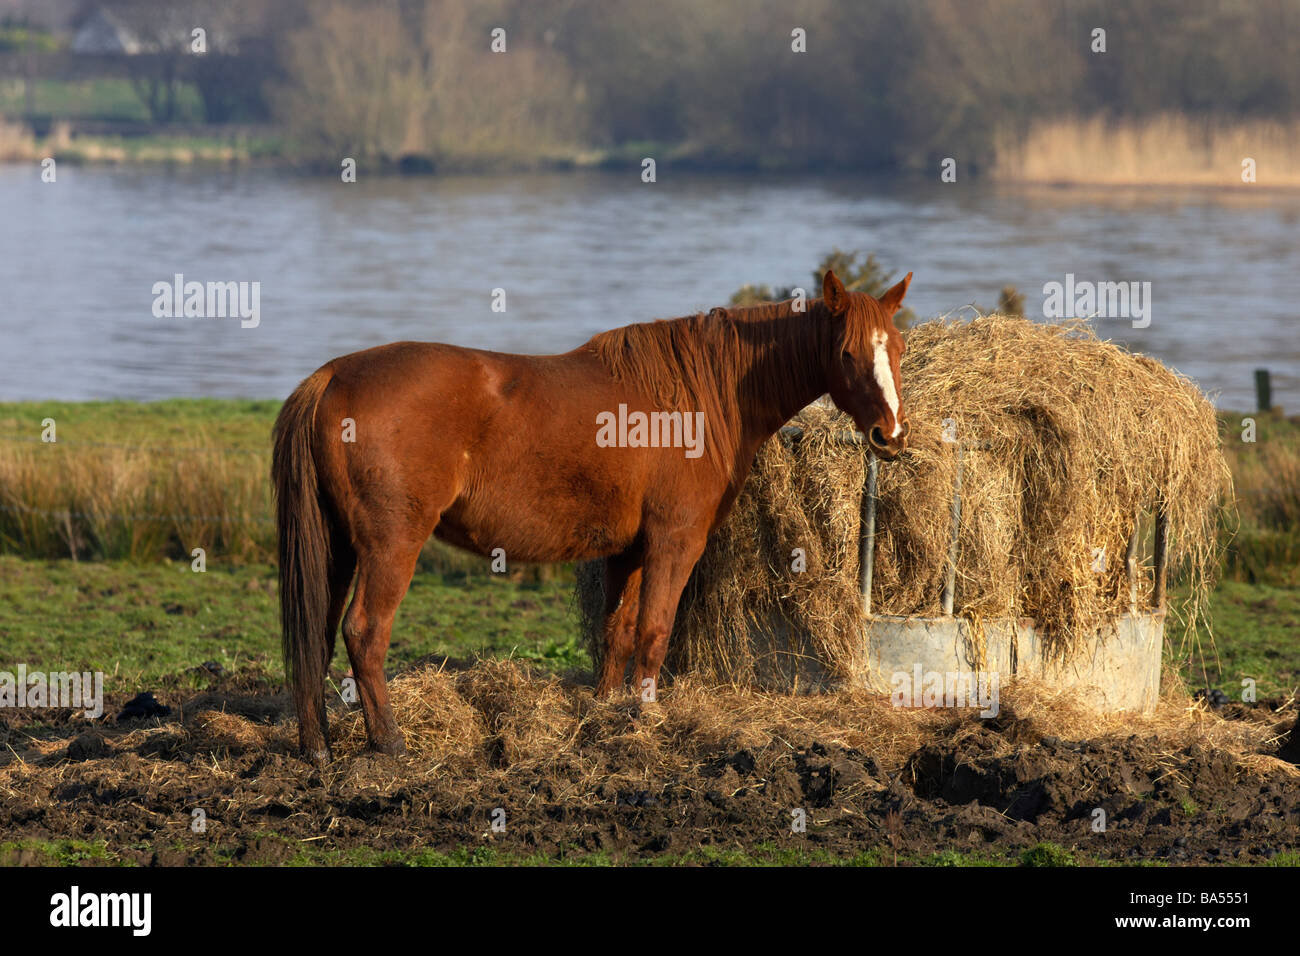 chestnut coloured horse eating from pile of hay in a field in county antrim northern ireland uk Stock Photo